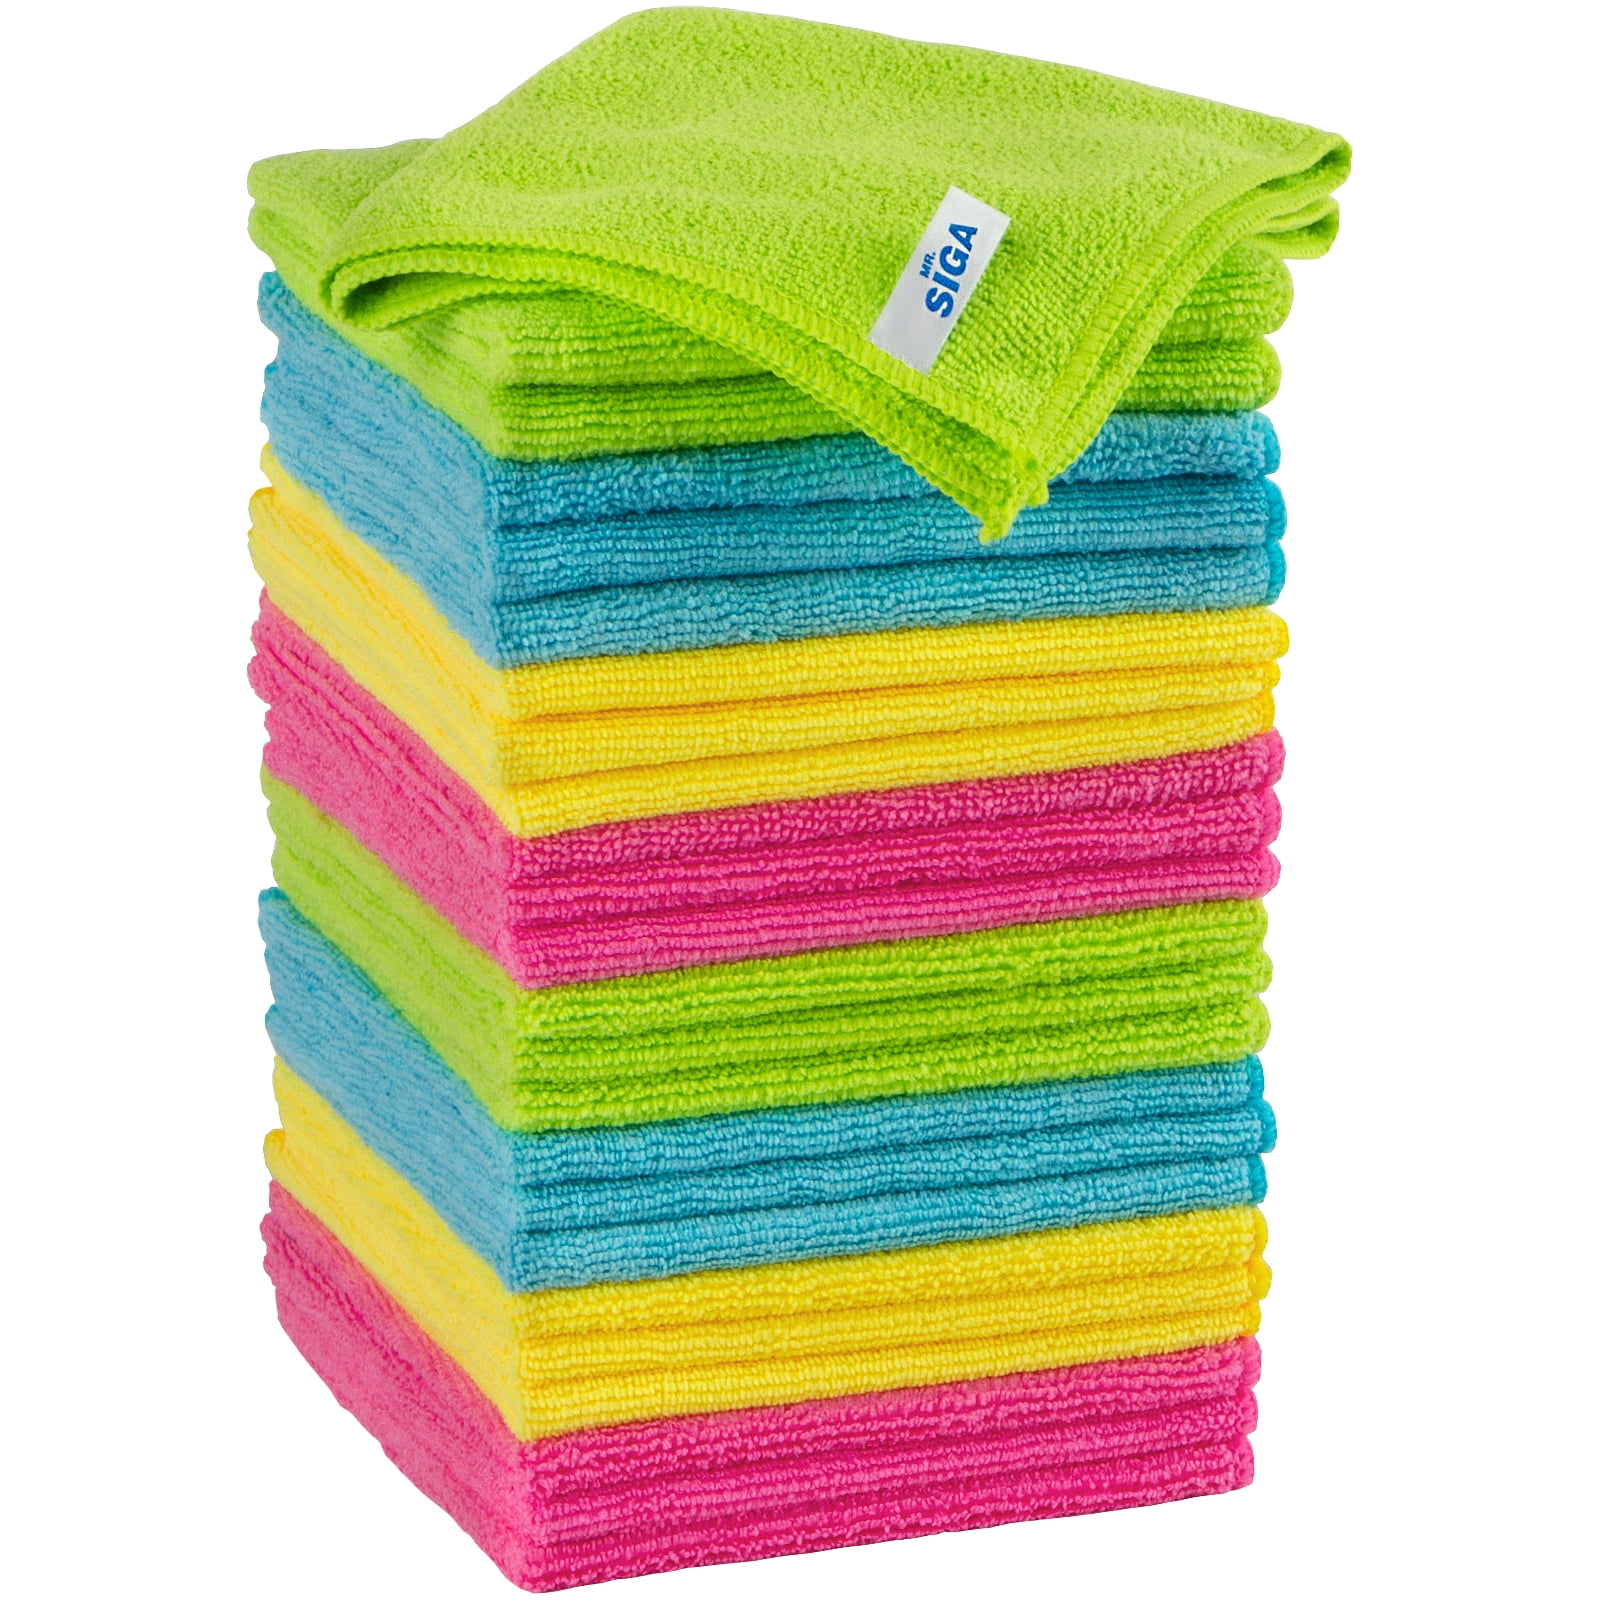 12 Pack Details about   Zwipes 735 Microfiber Towel Cleaning Cloths 